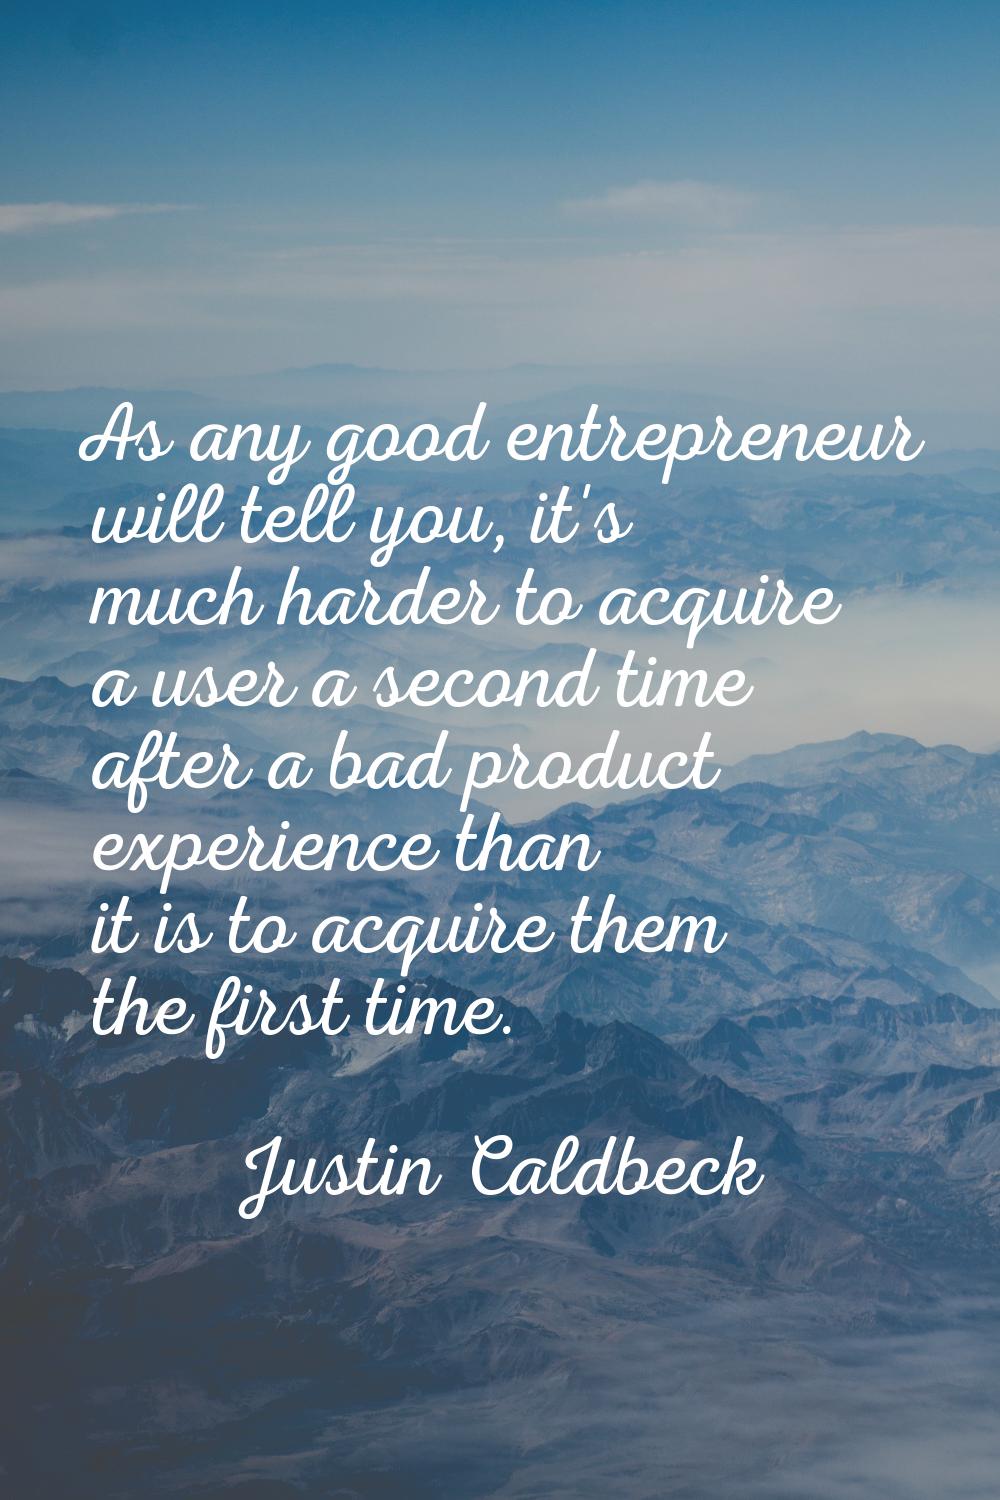 As any good entrepreneur will tell you, it's much harder to acquire a user a second time after a ba